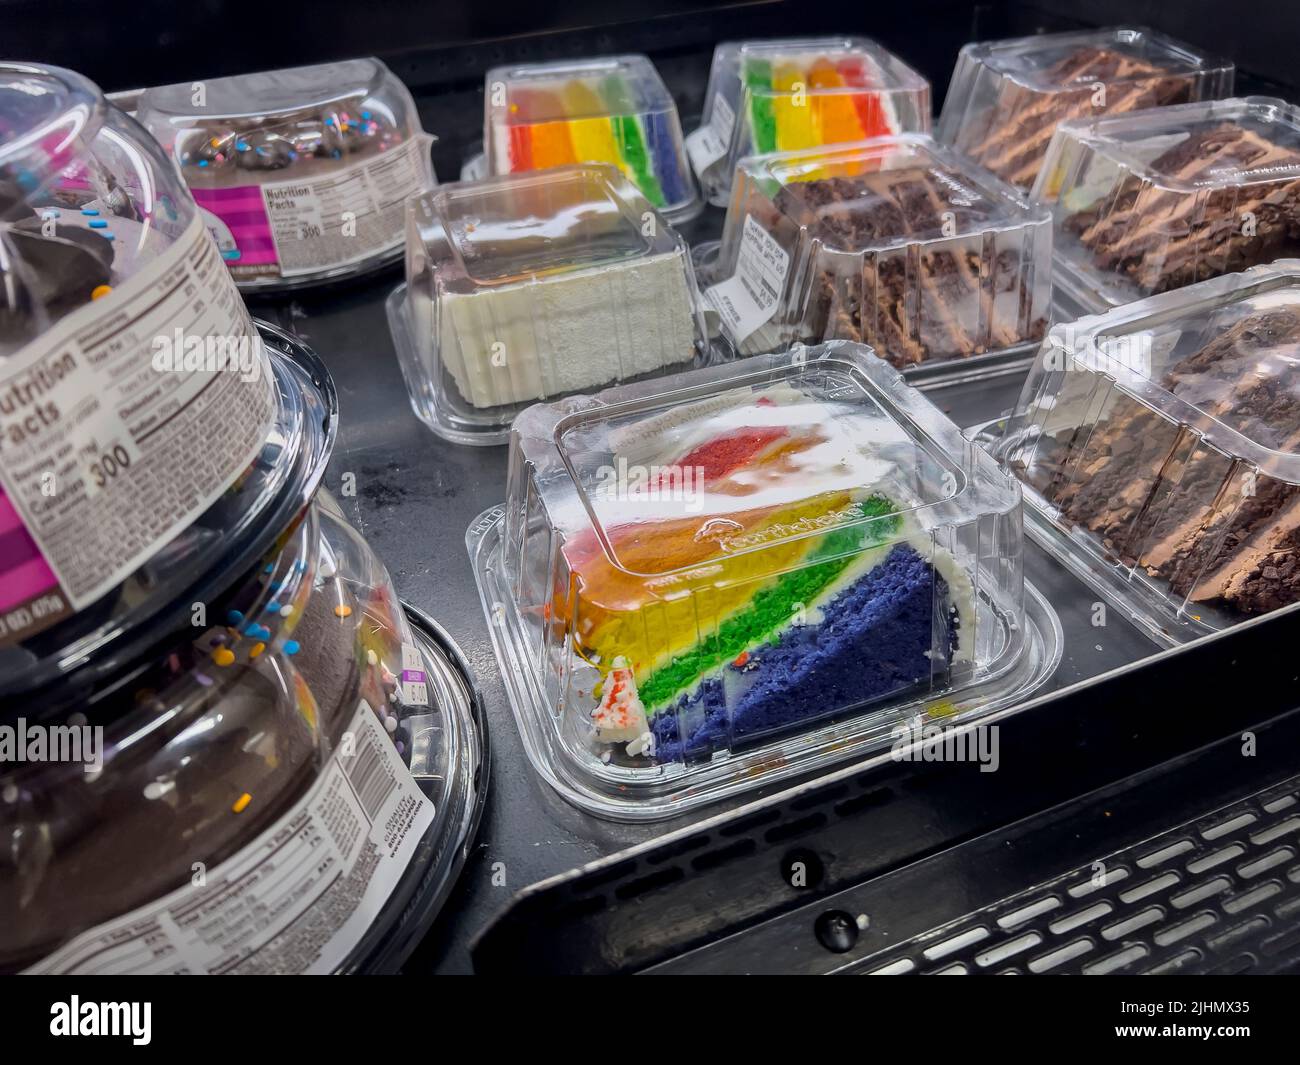 Seattle, WA USA - circa June 2022: Close up view of gay pride cake for sale inside a local grocery store. Stock Photo